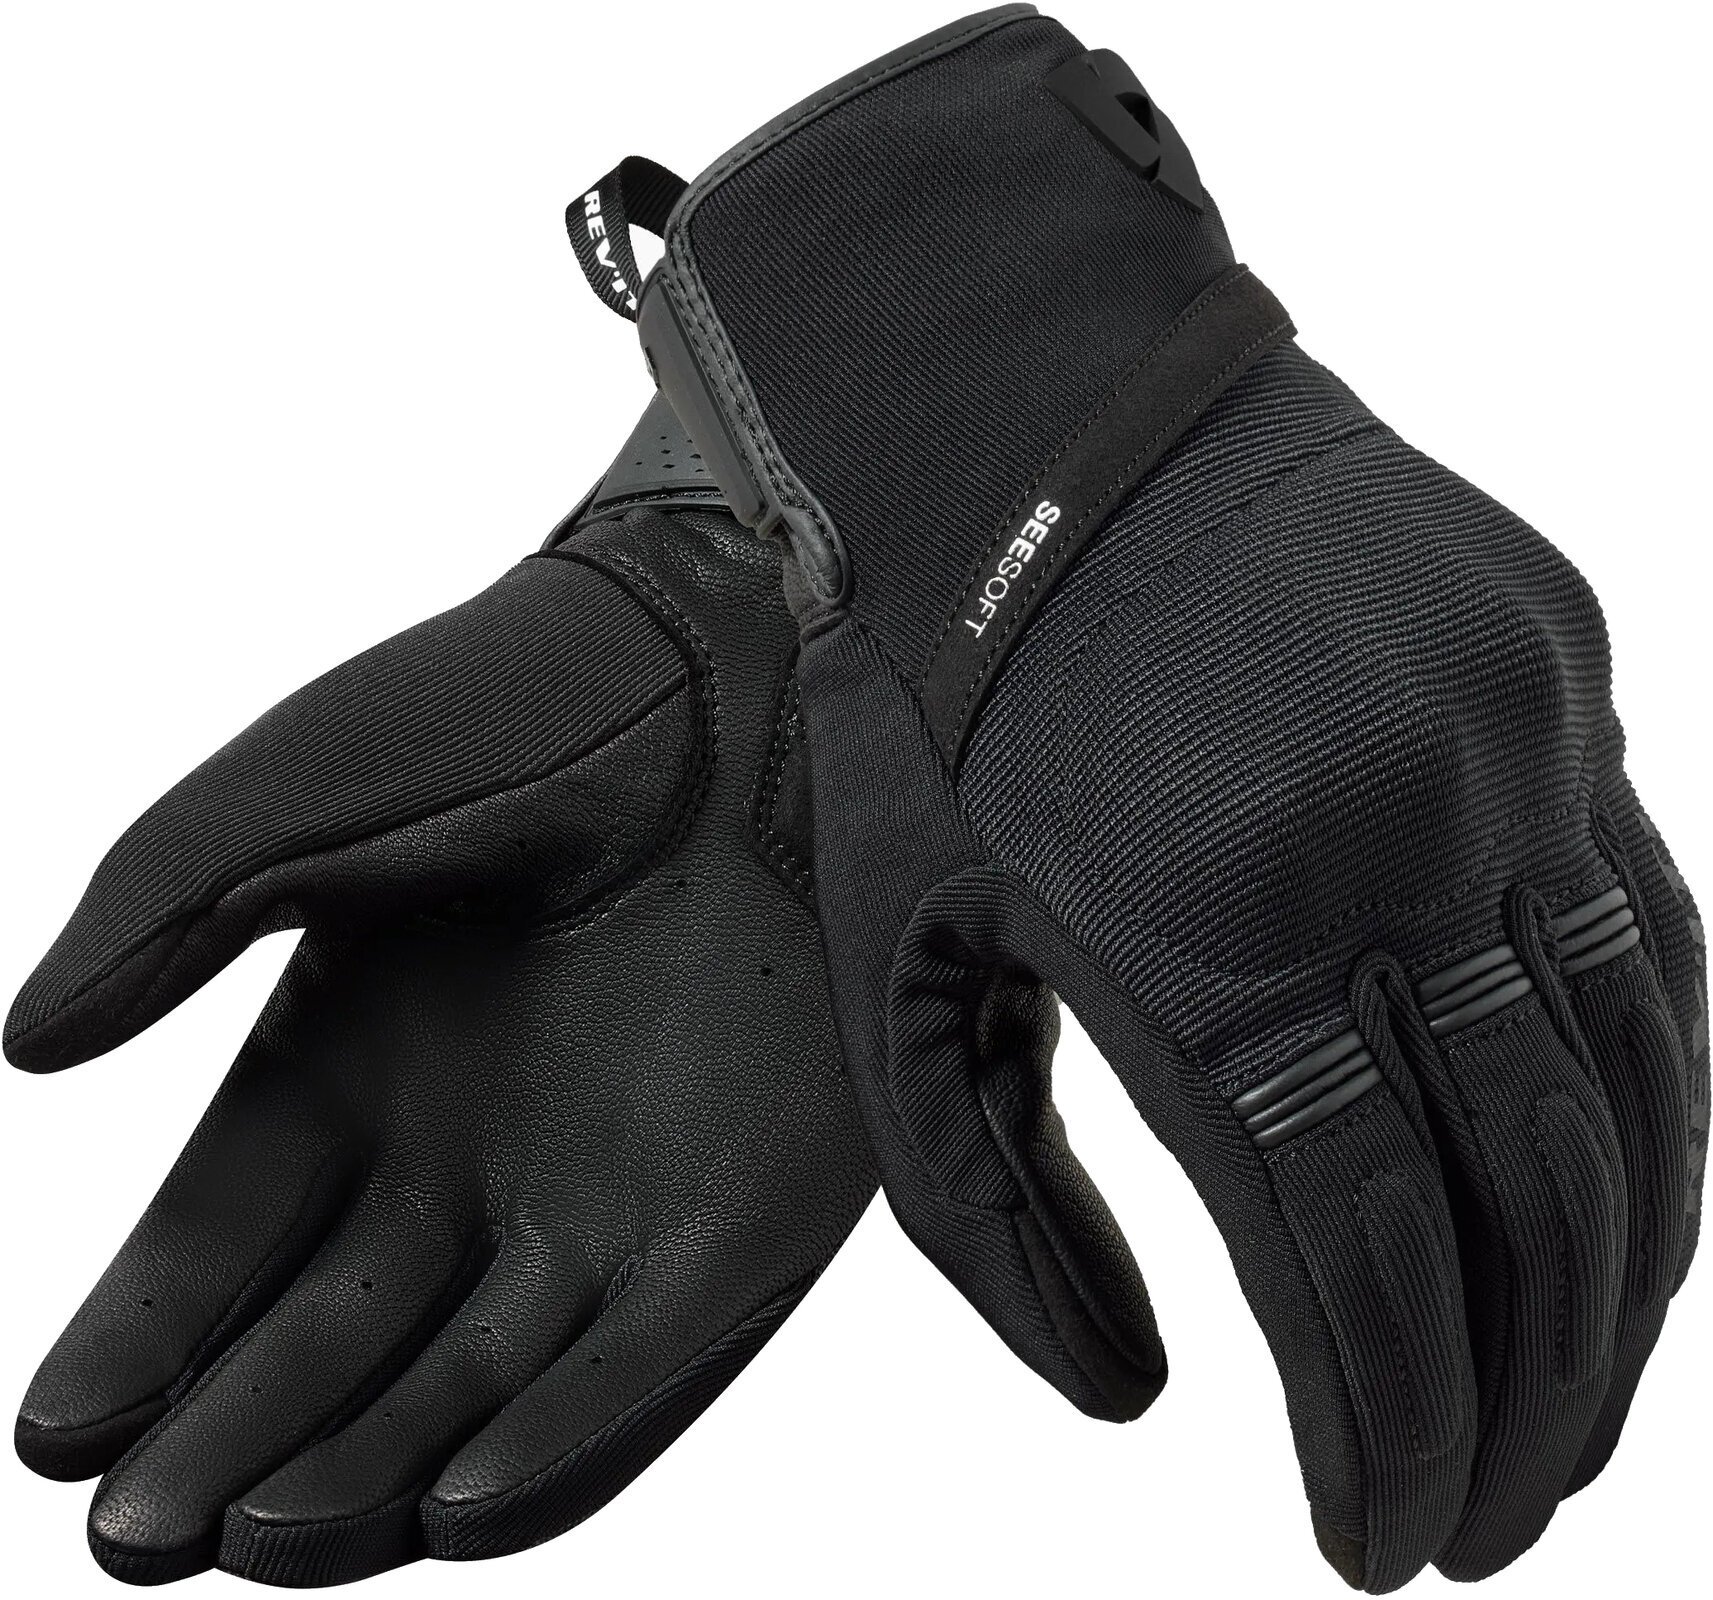 Motorcycle Gloves Rev'it! Gloves Mosca 2 Black 2XL Motorcycle Gloves